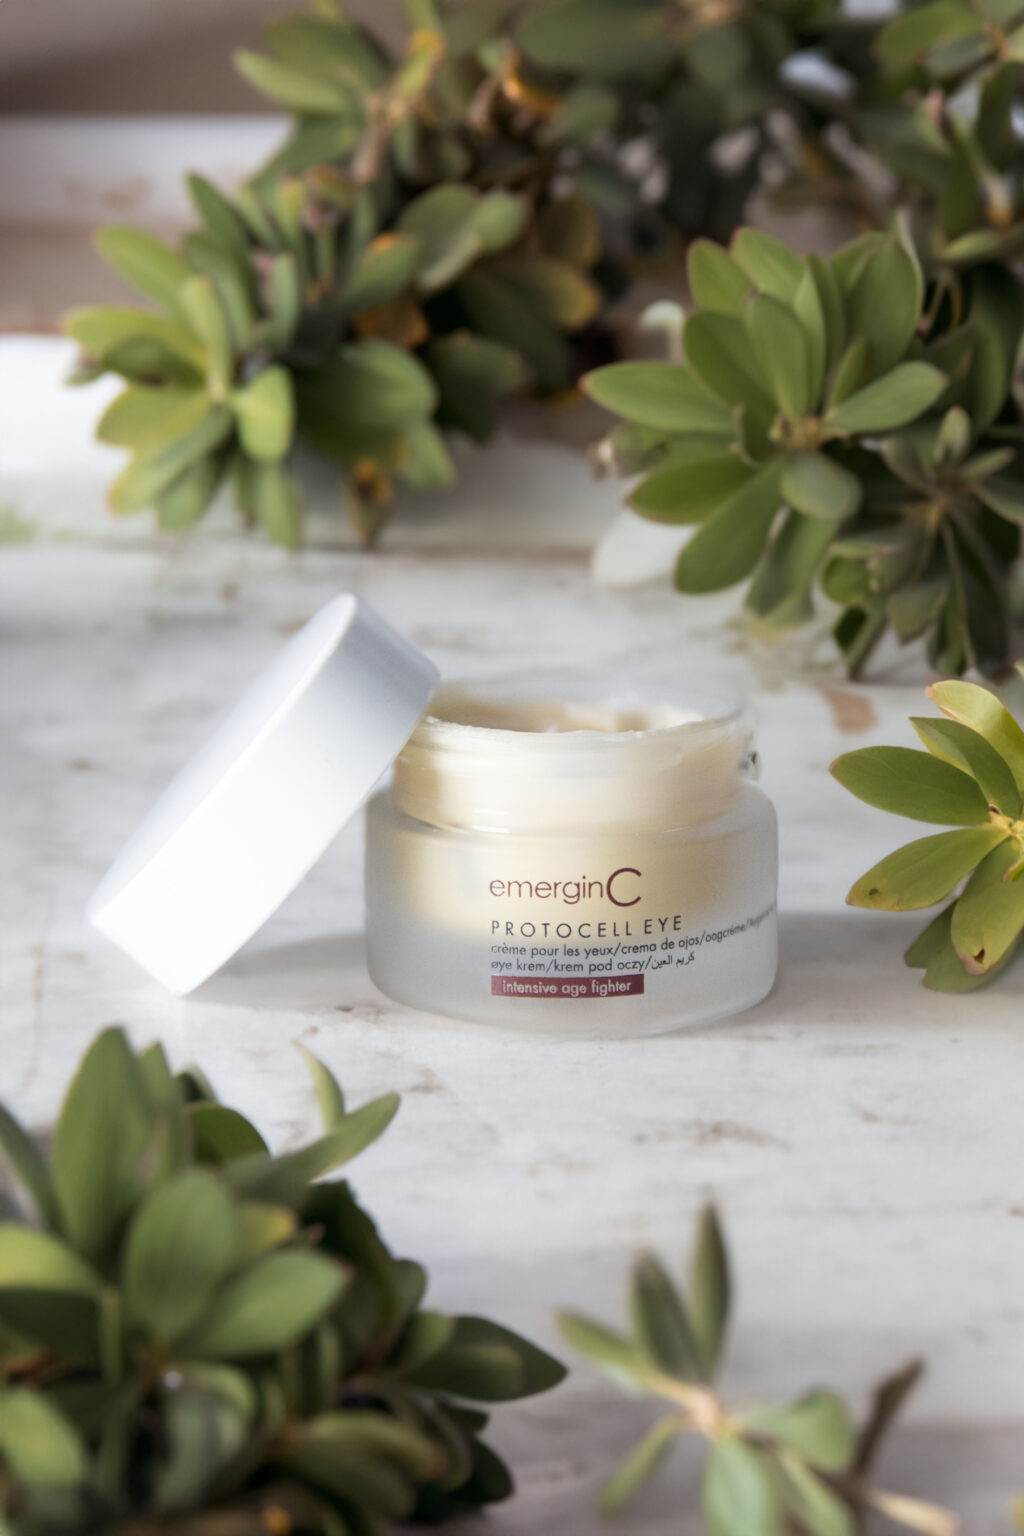 A jar of EmerginC Protocell Eye Cream surrounded by fresh green succulents on a marble surface, suggesting a natural and luxurious skincare routine.